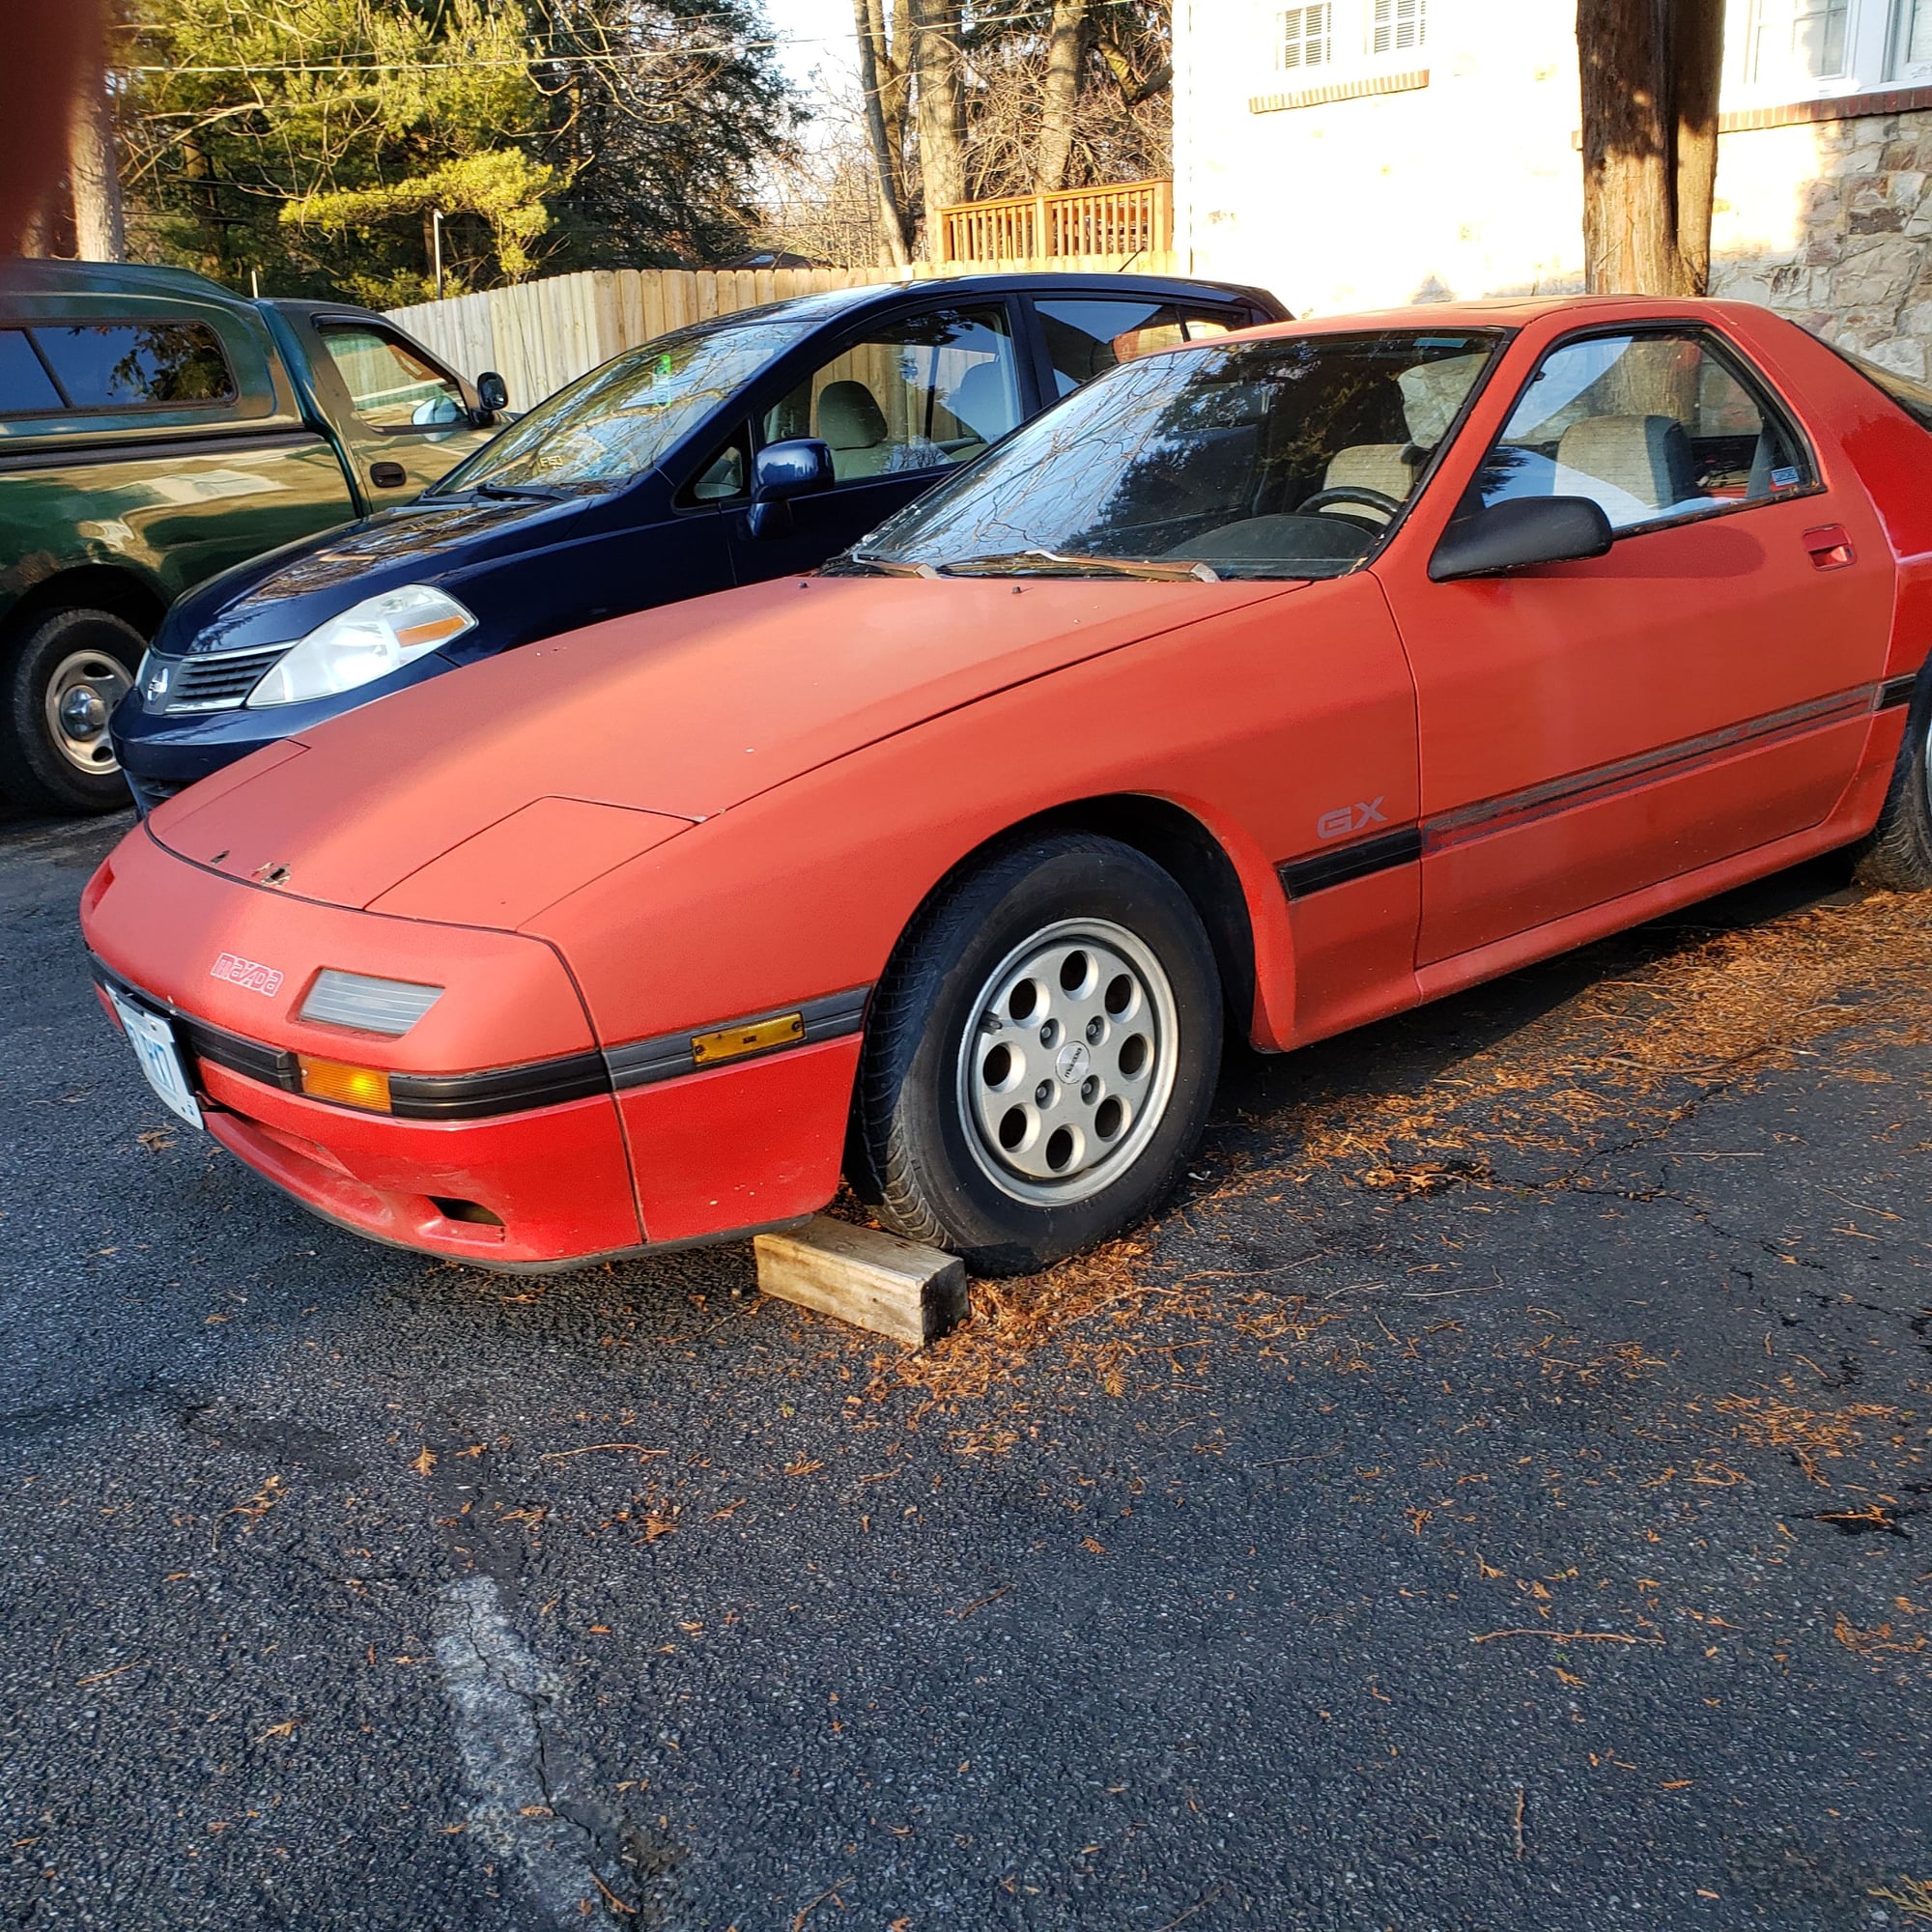 1987 Mazda RX-7 - 1987 RX-7 GX Project or Parts - Used - VIN JM1FC3319HO539462 - 84,000 Miles - Other - 2WD - Manual - Coupe - Red - State College, PA 16803, United States